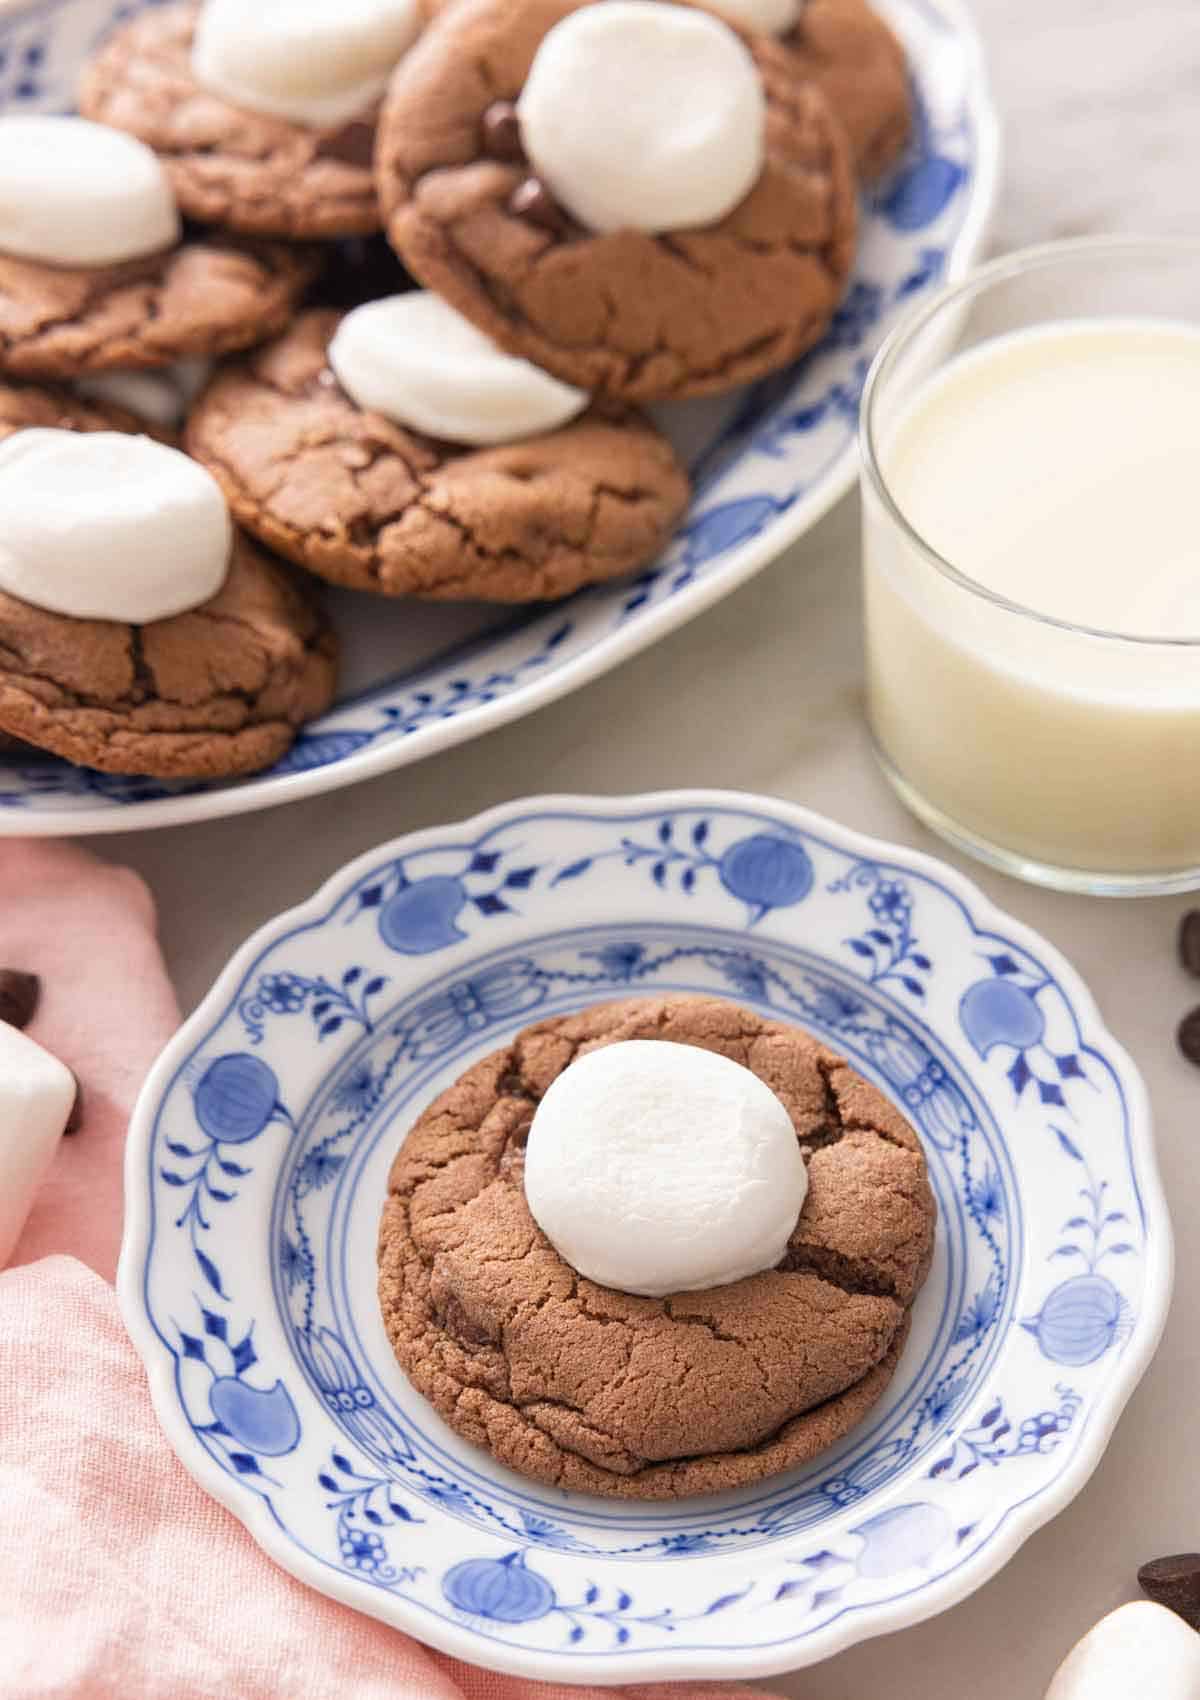 A plate with a hot chocolate cookies in front of a glass of milk.